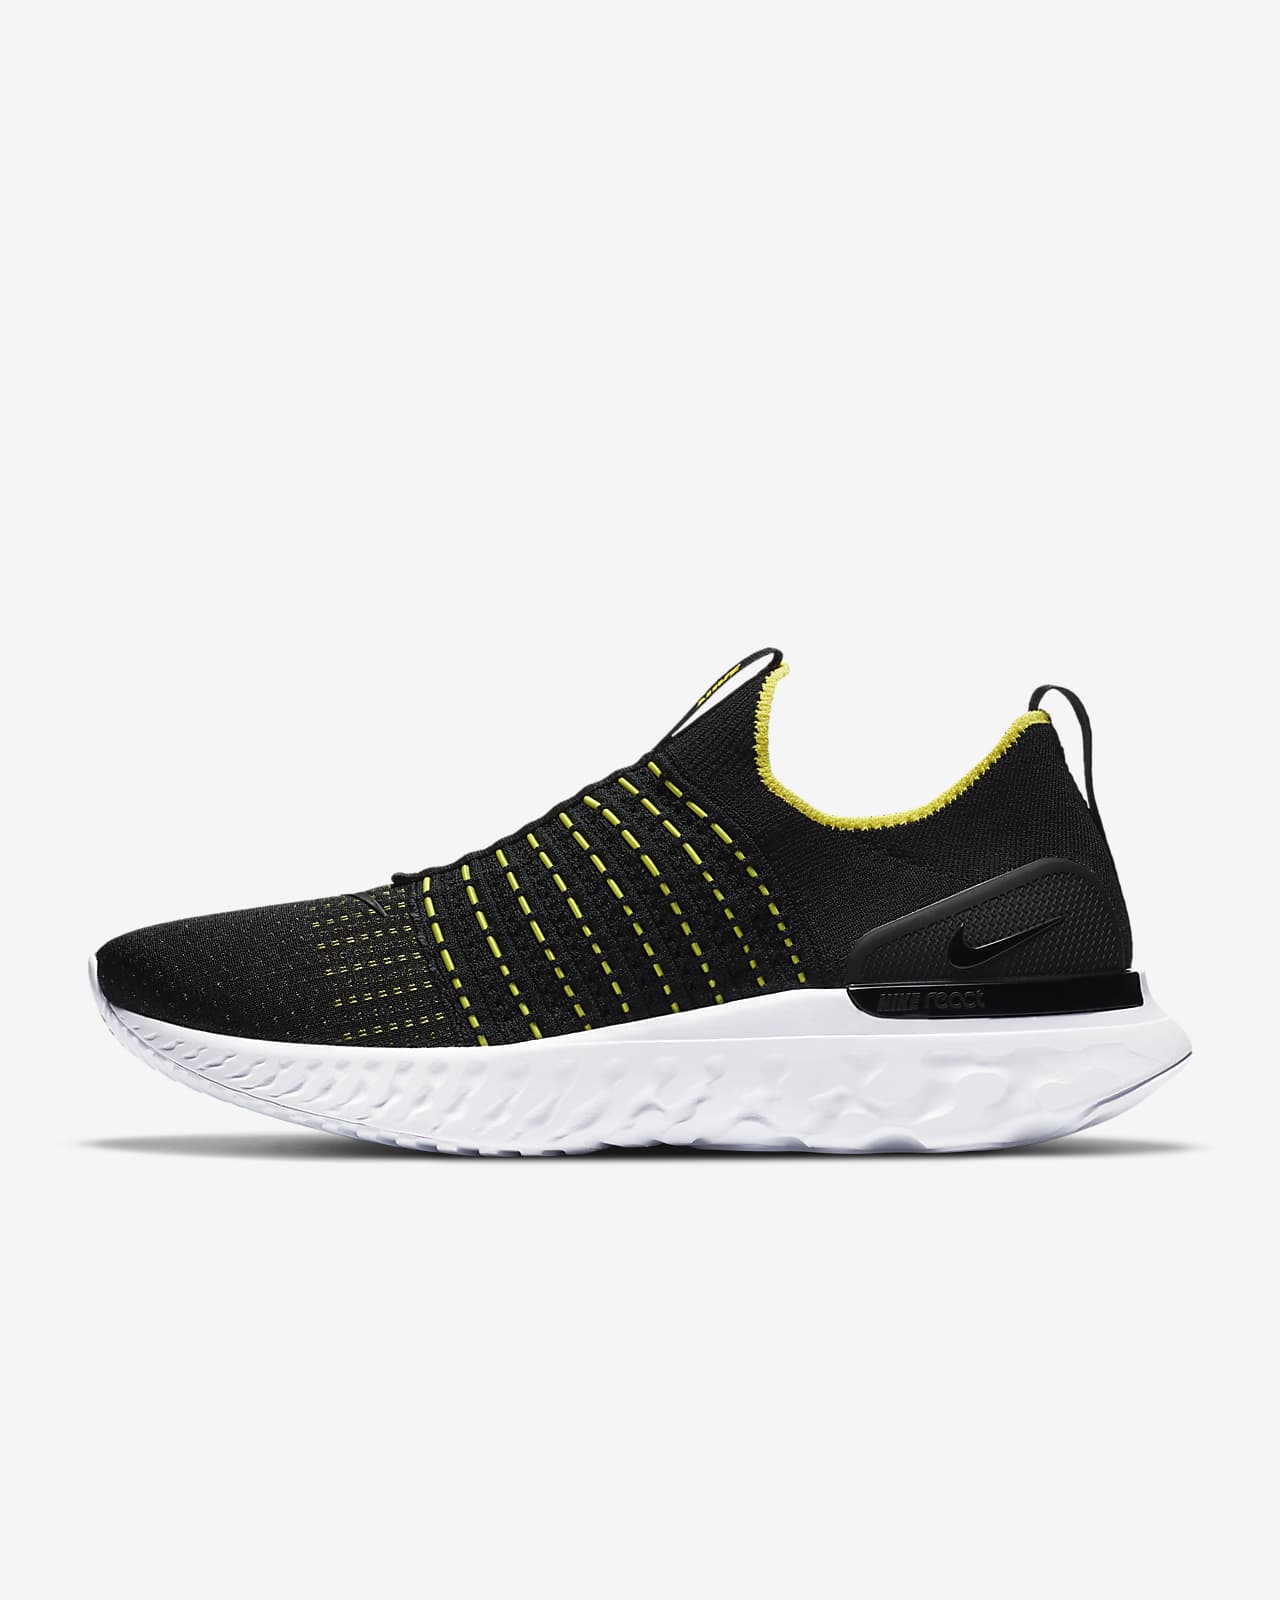 black and yellow nike running shoes